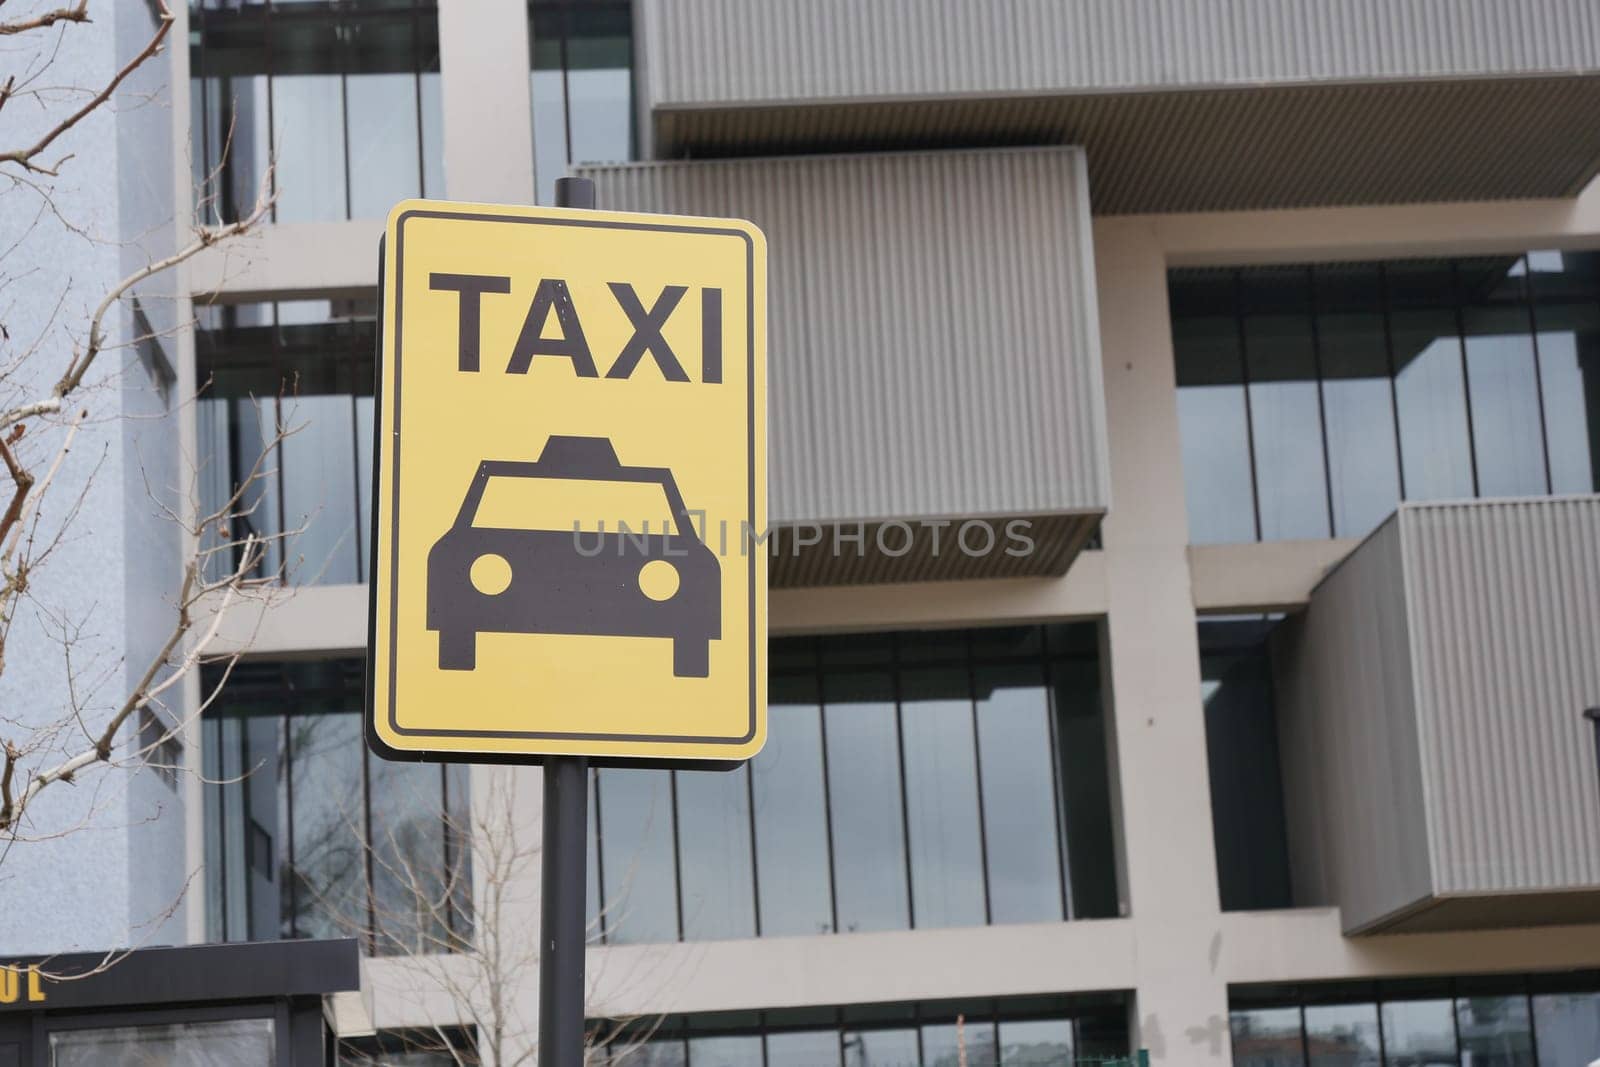 Close-up photo of a yellow Taxi stand sign attached to a metal pole.